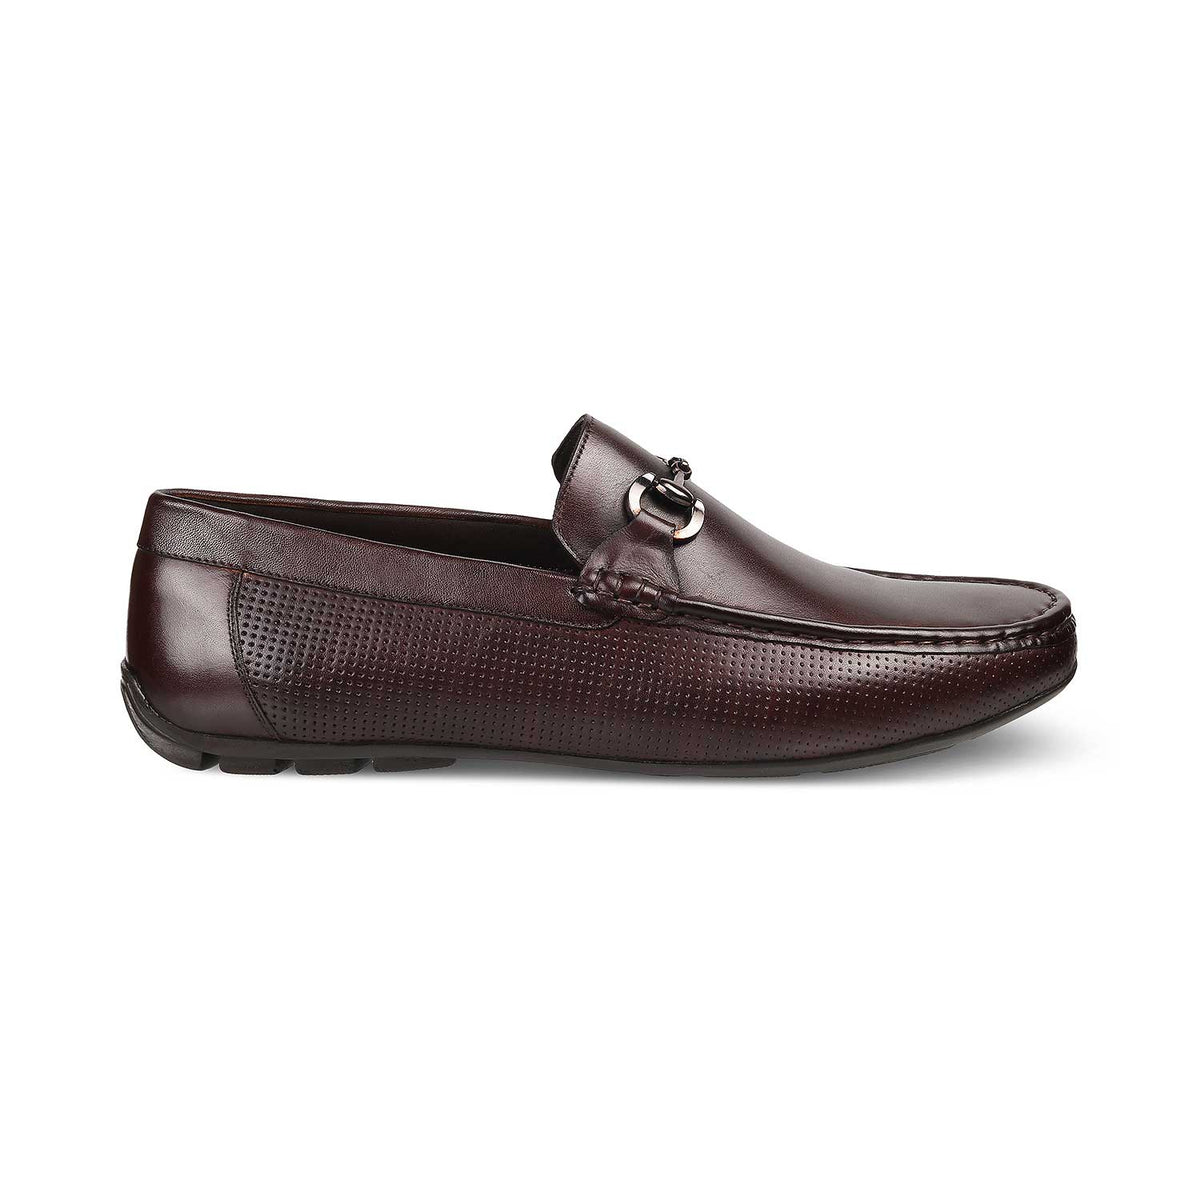 The Otterdam Brown Men's Leather Driving Loafers - Tresmode